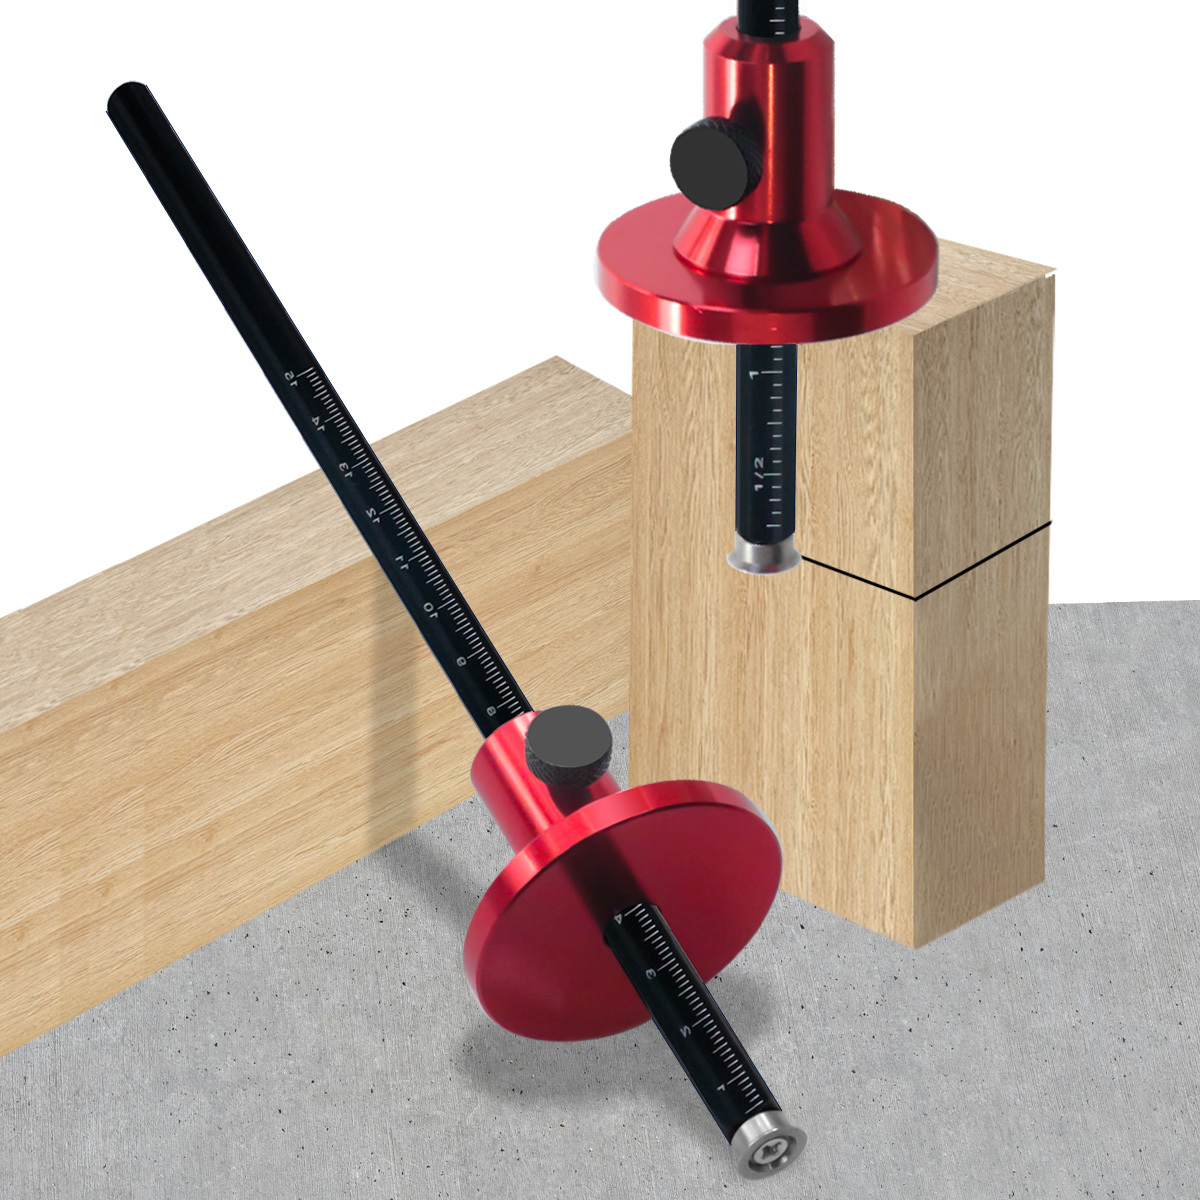 Wood Marking Trough - Wood Scribe Tool With Wood Wheel Marking (red)